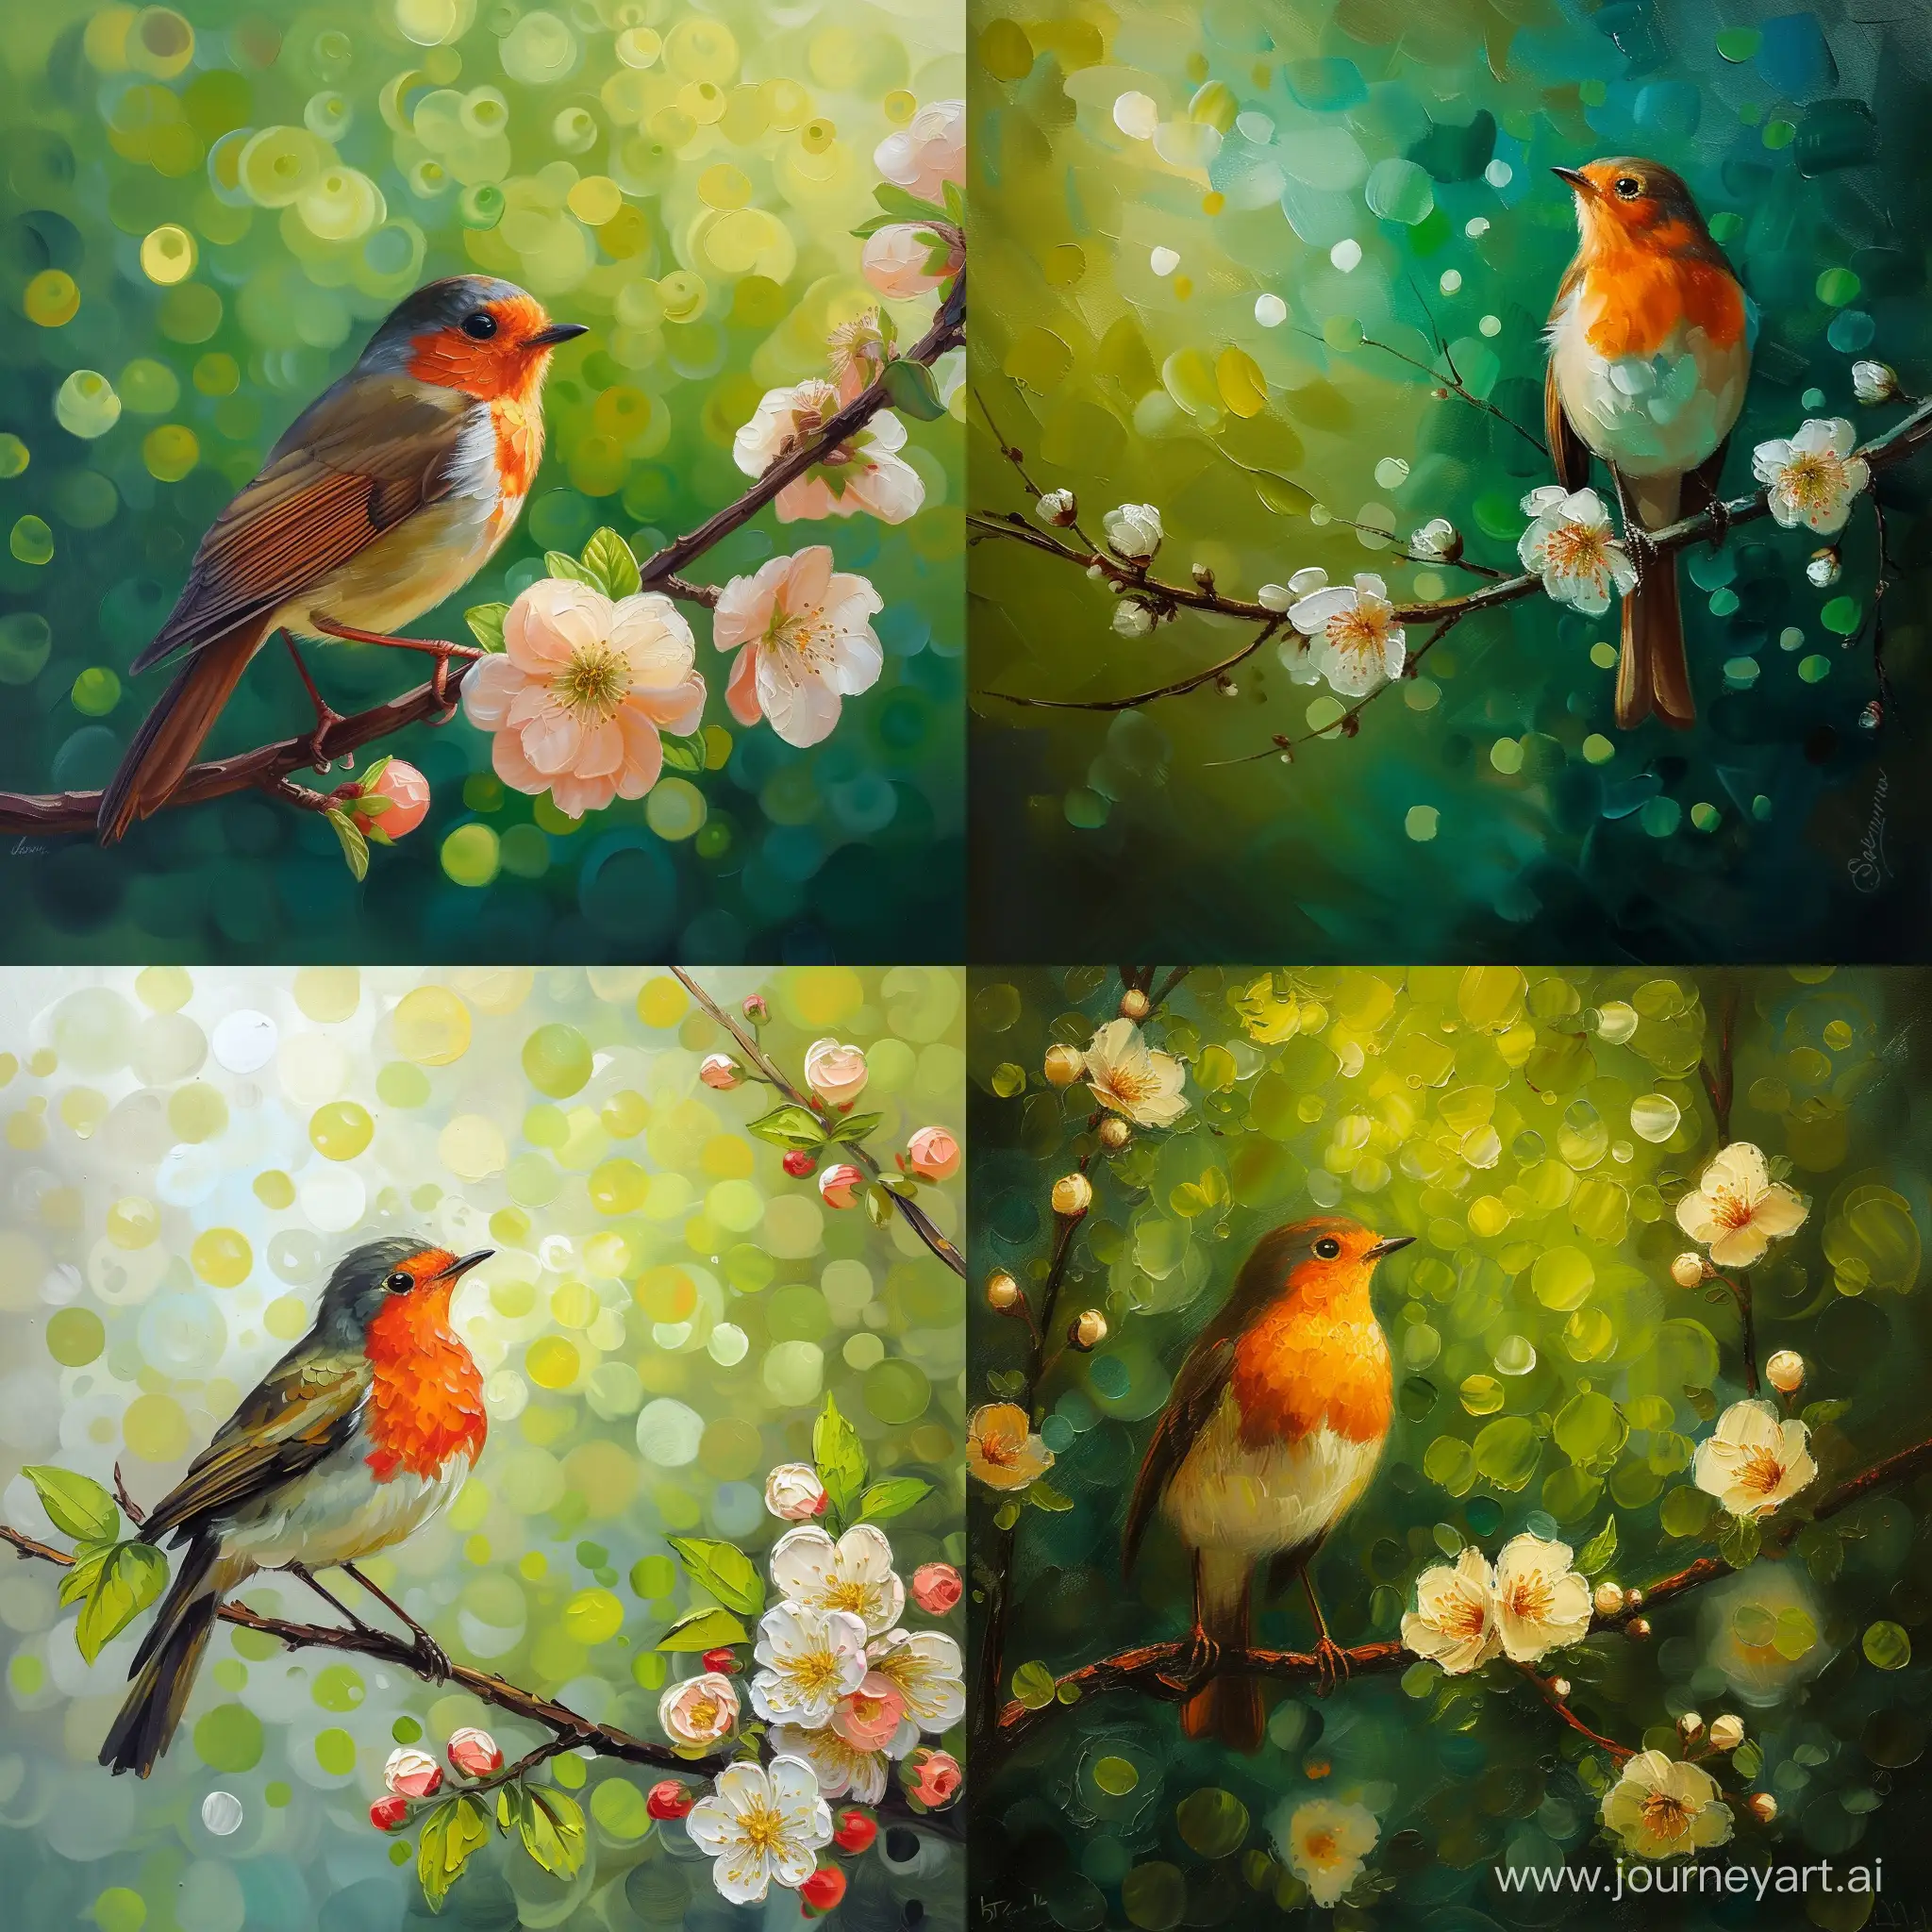 oil painting, clean smooth painted brush stroke, blossom flowers with robin bird sitting on branch bokeh olive green colors in backgroud smooth paint